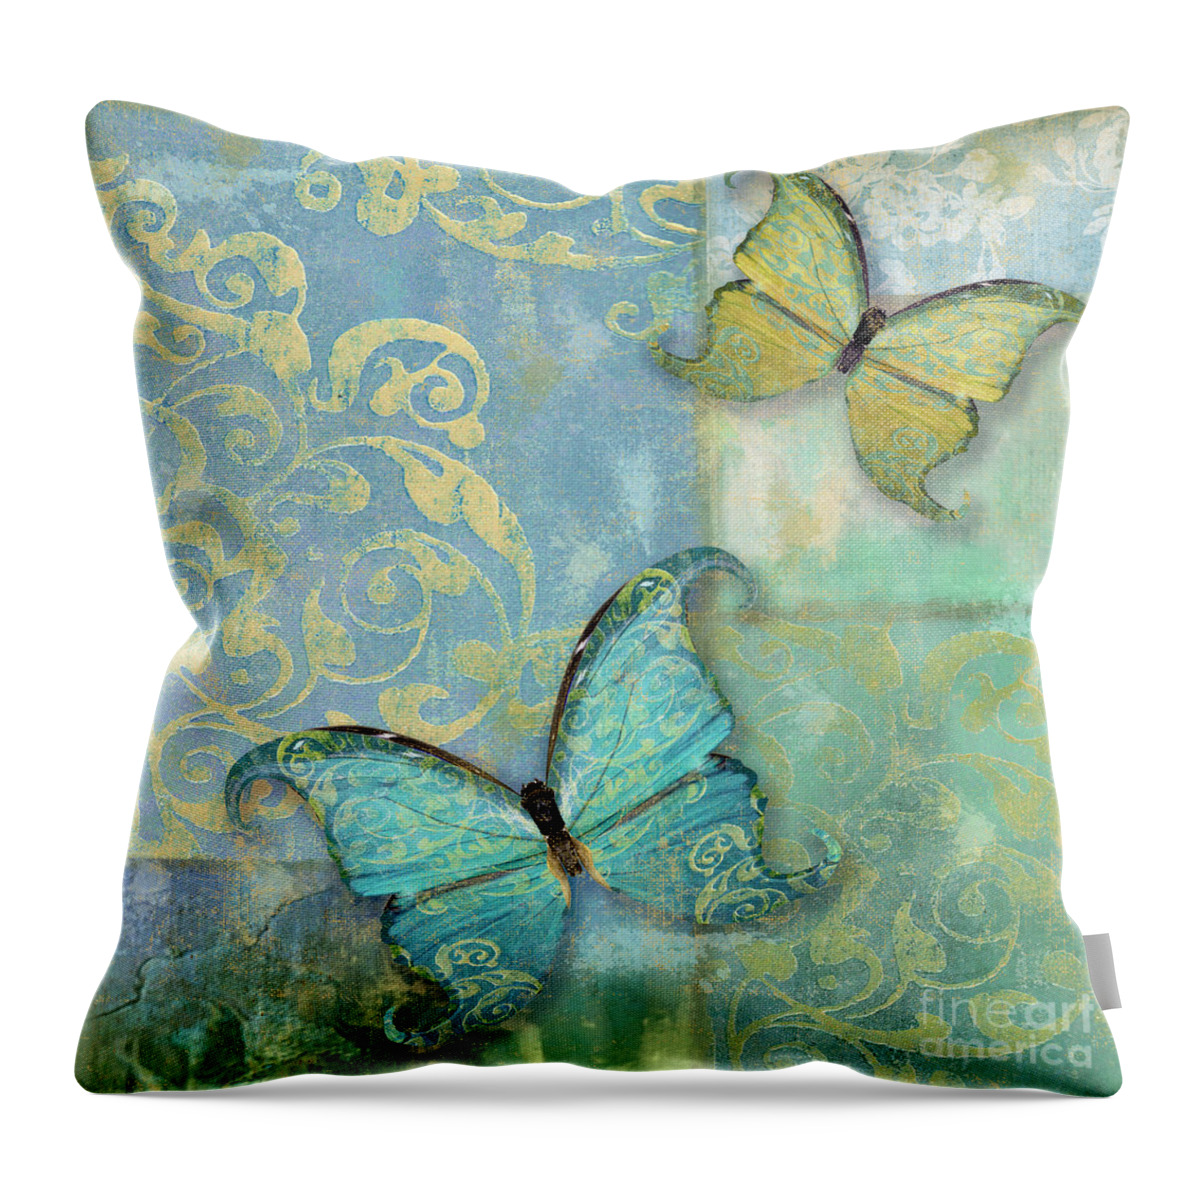 Damask Butterflies Throw Pillow featuring the painting Damask and Butterflies I by Mindy Sommers